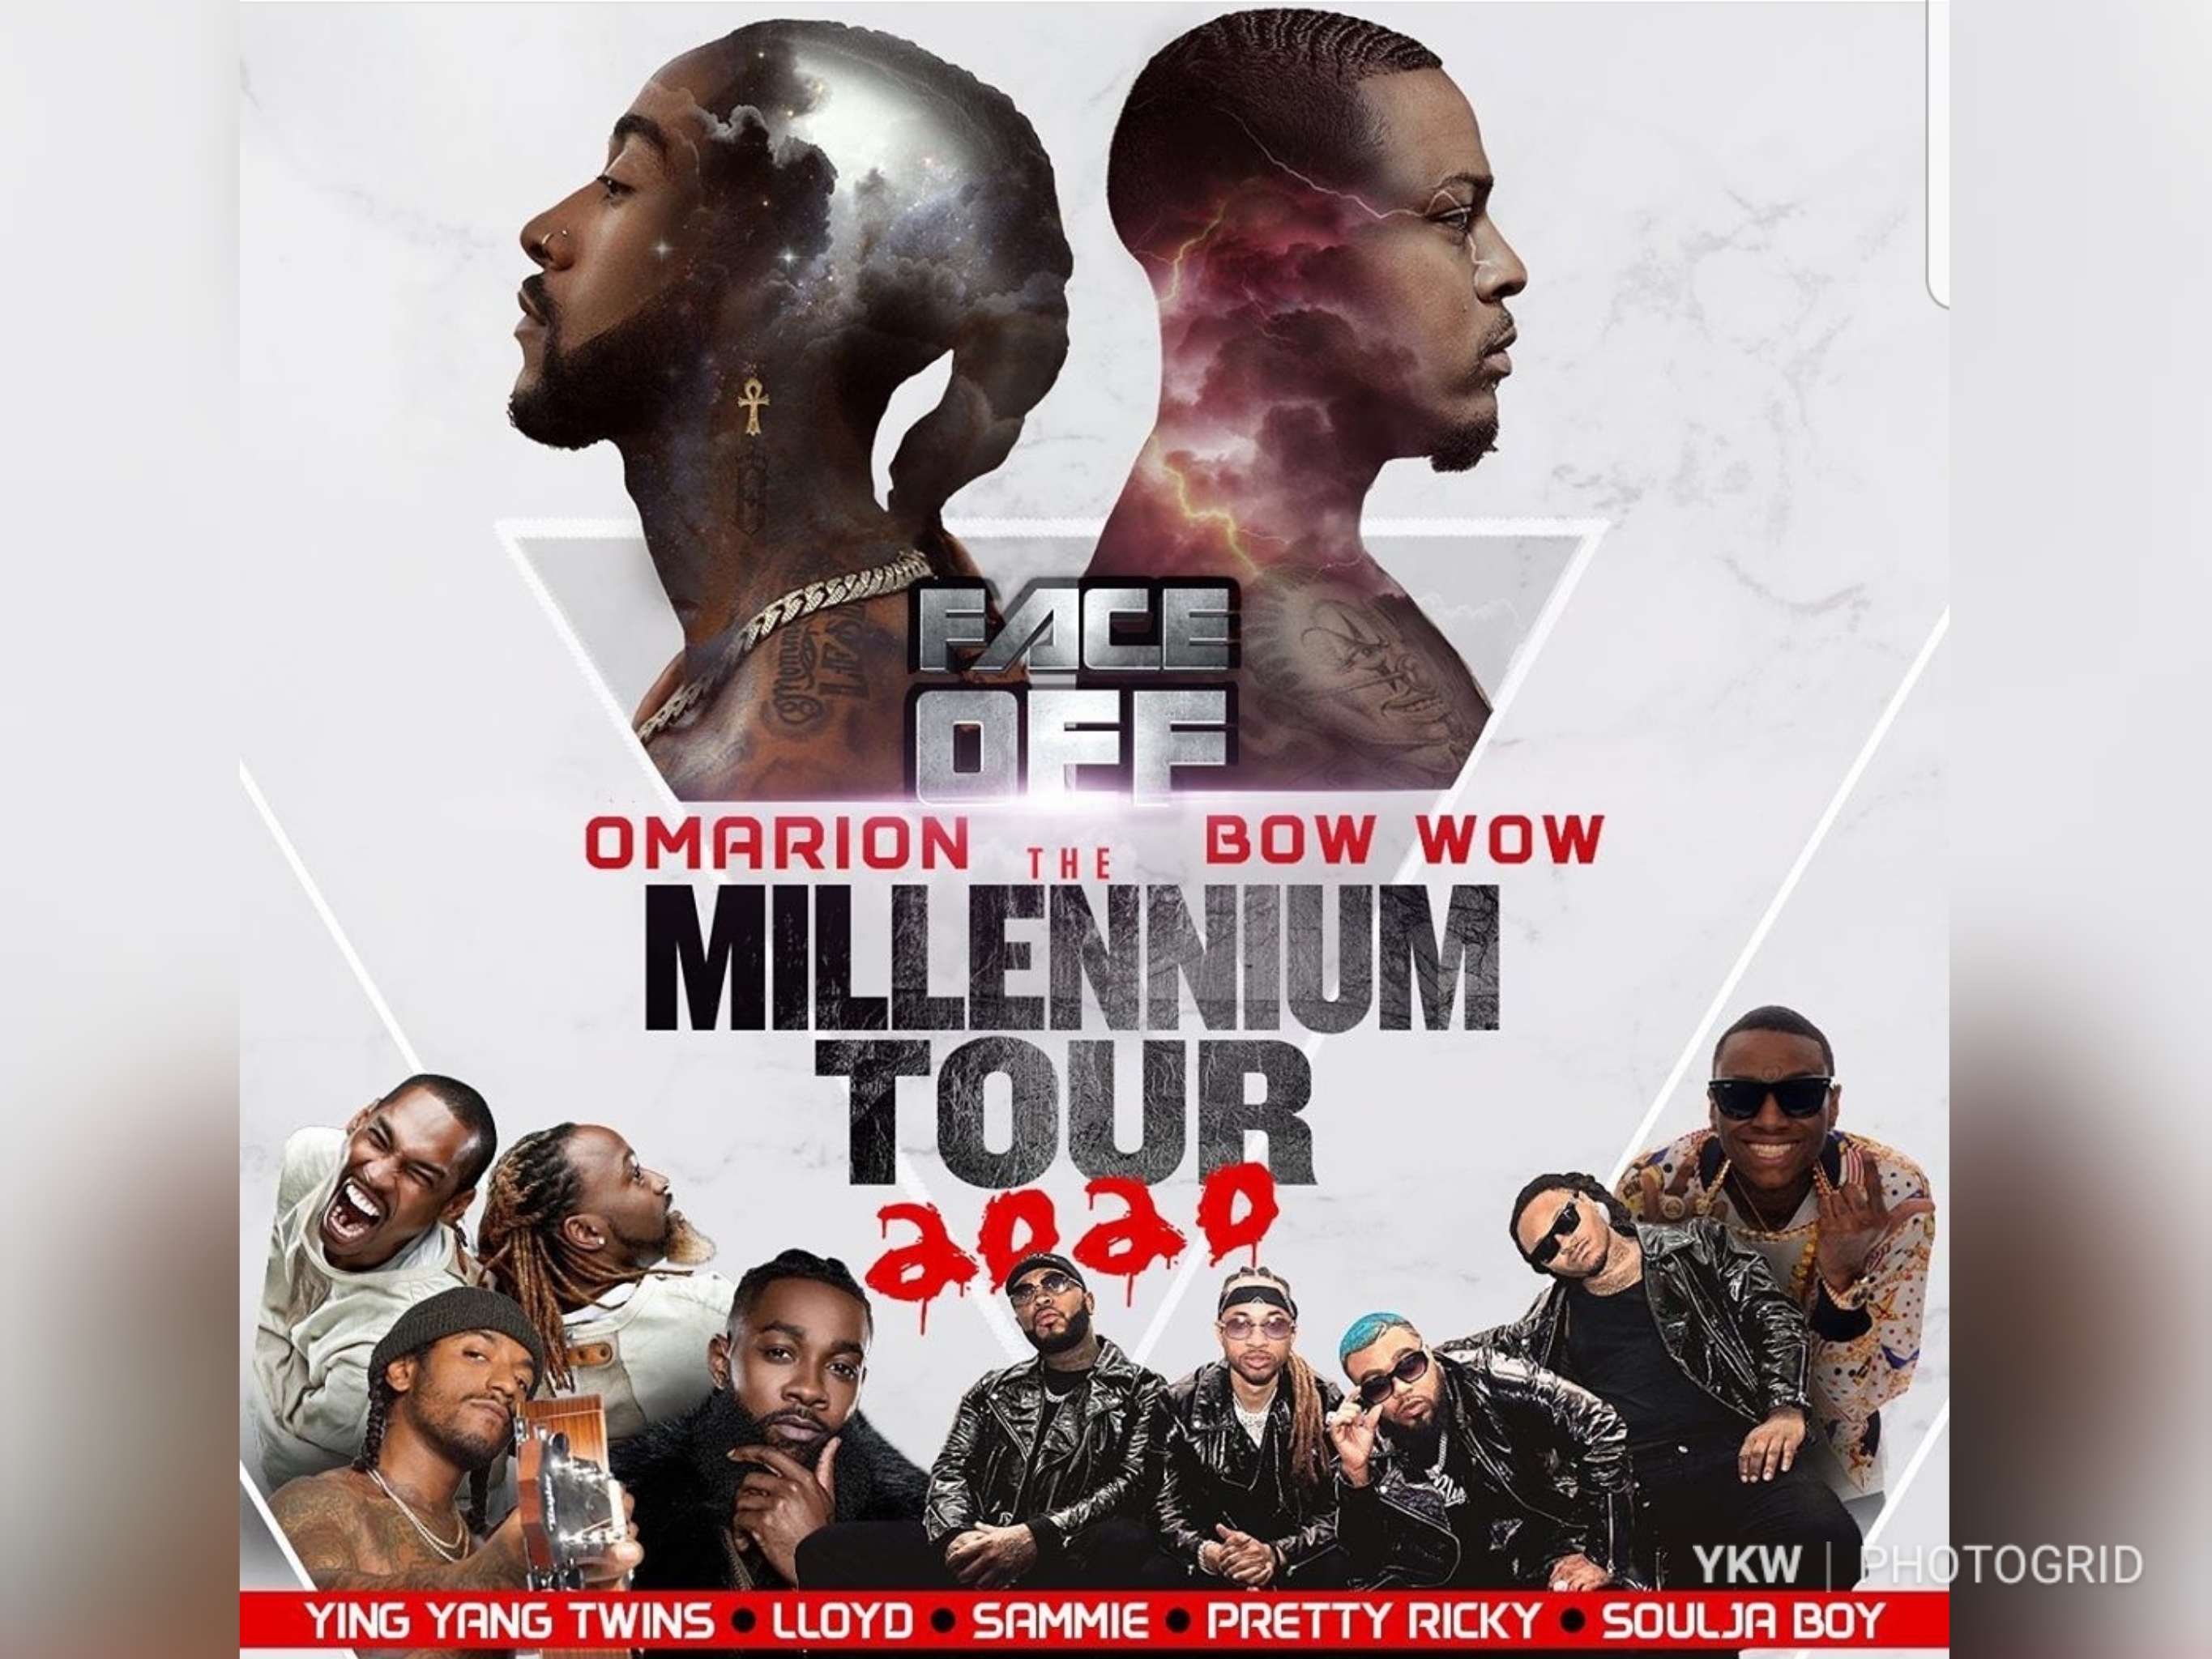 Omarion Announces Millennium Tour 2020 With Bow Wow And Other Artists But No B2K